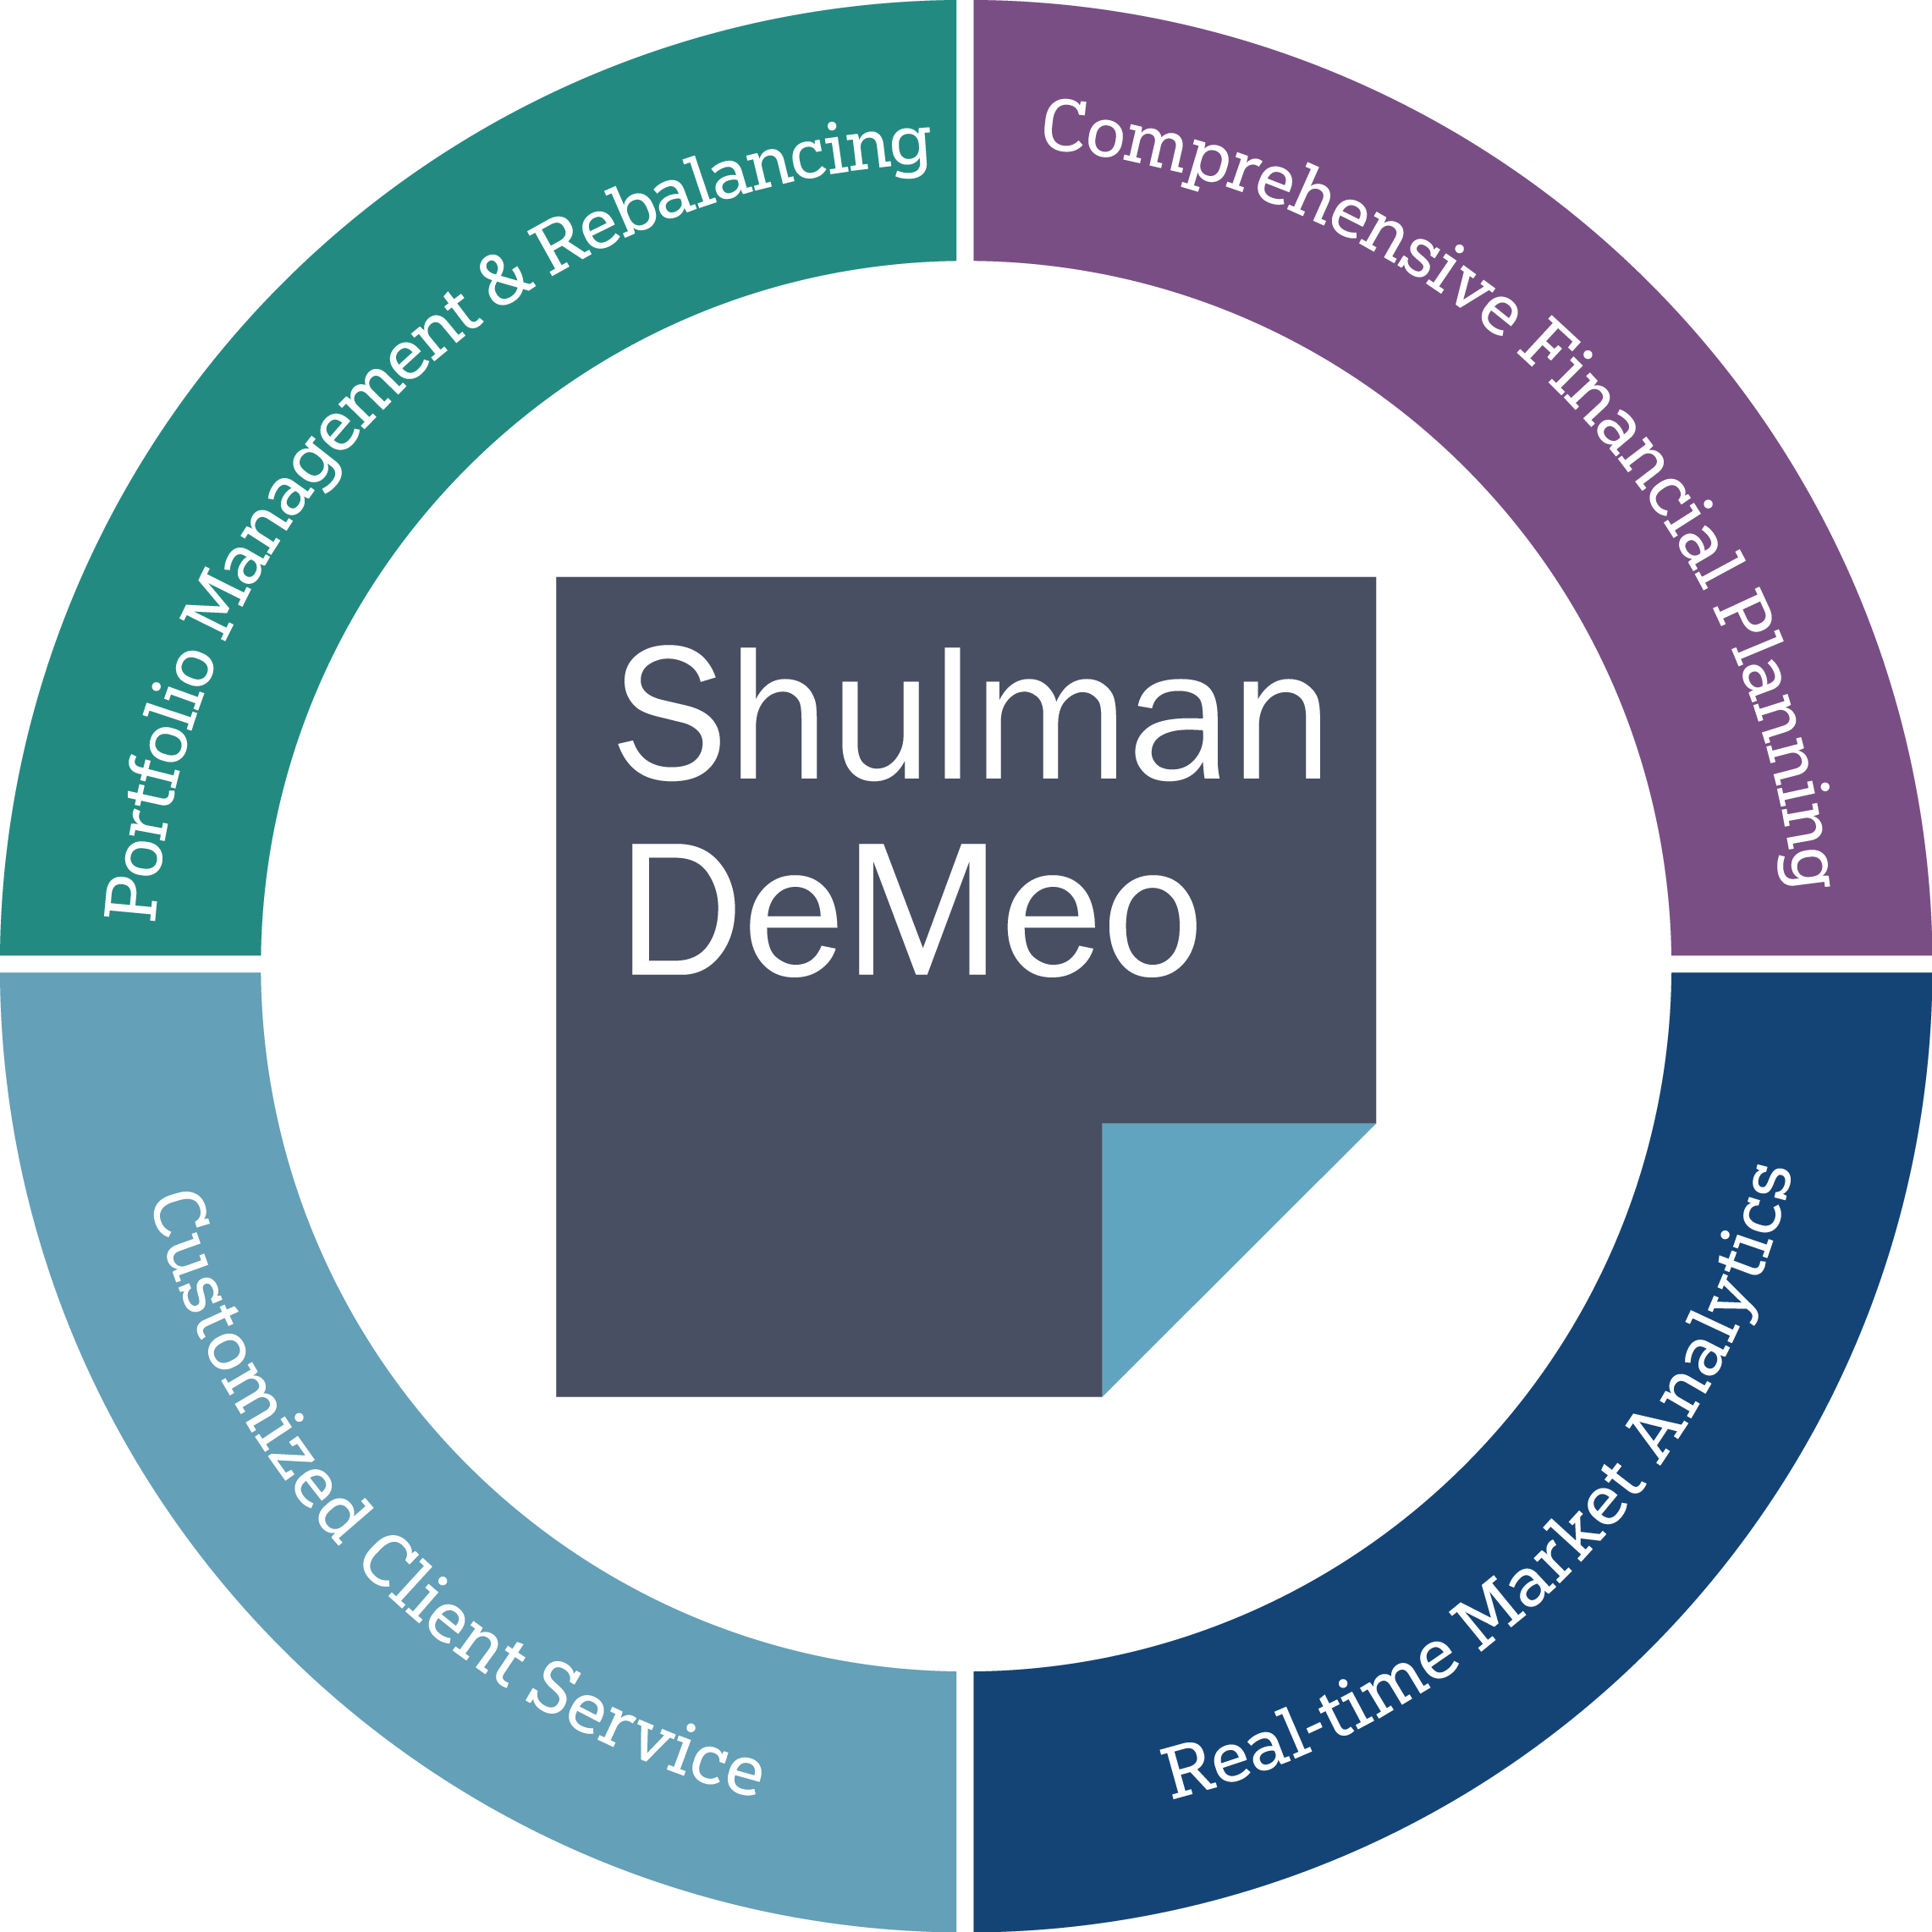 A chart describing the Shulman DeMeo advantage. They offer: portfolios management and rebalancing, comprehensive financial planning, real-time market analytics, and customized client services.